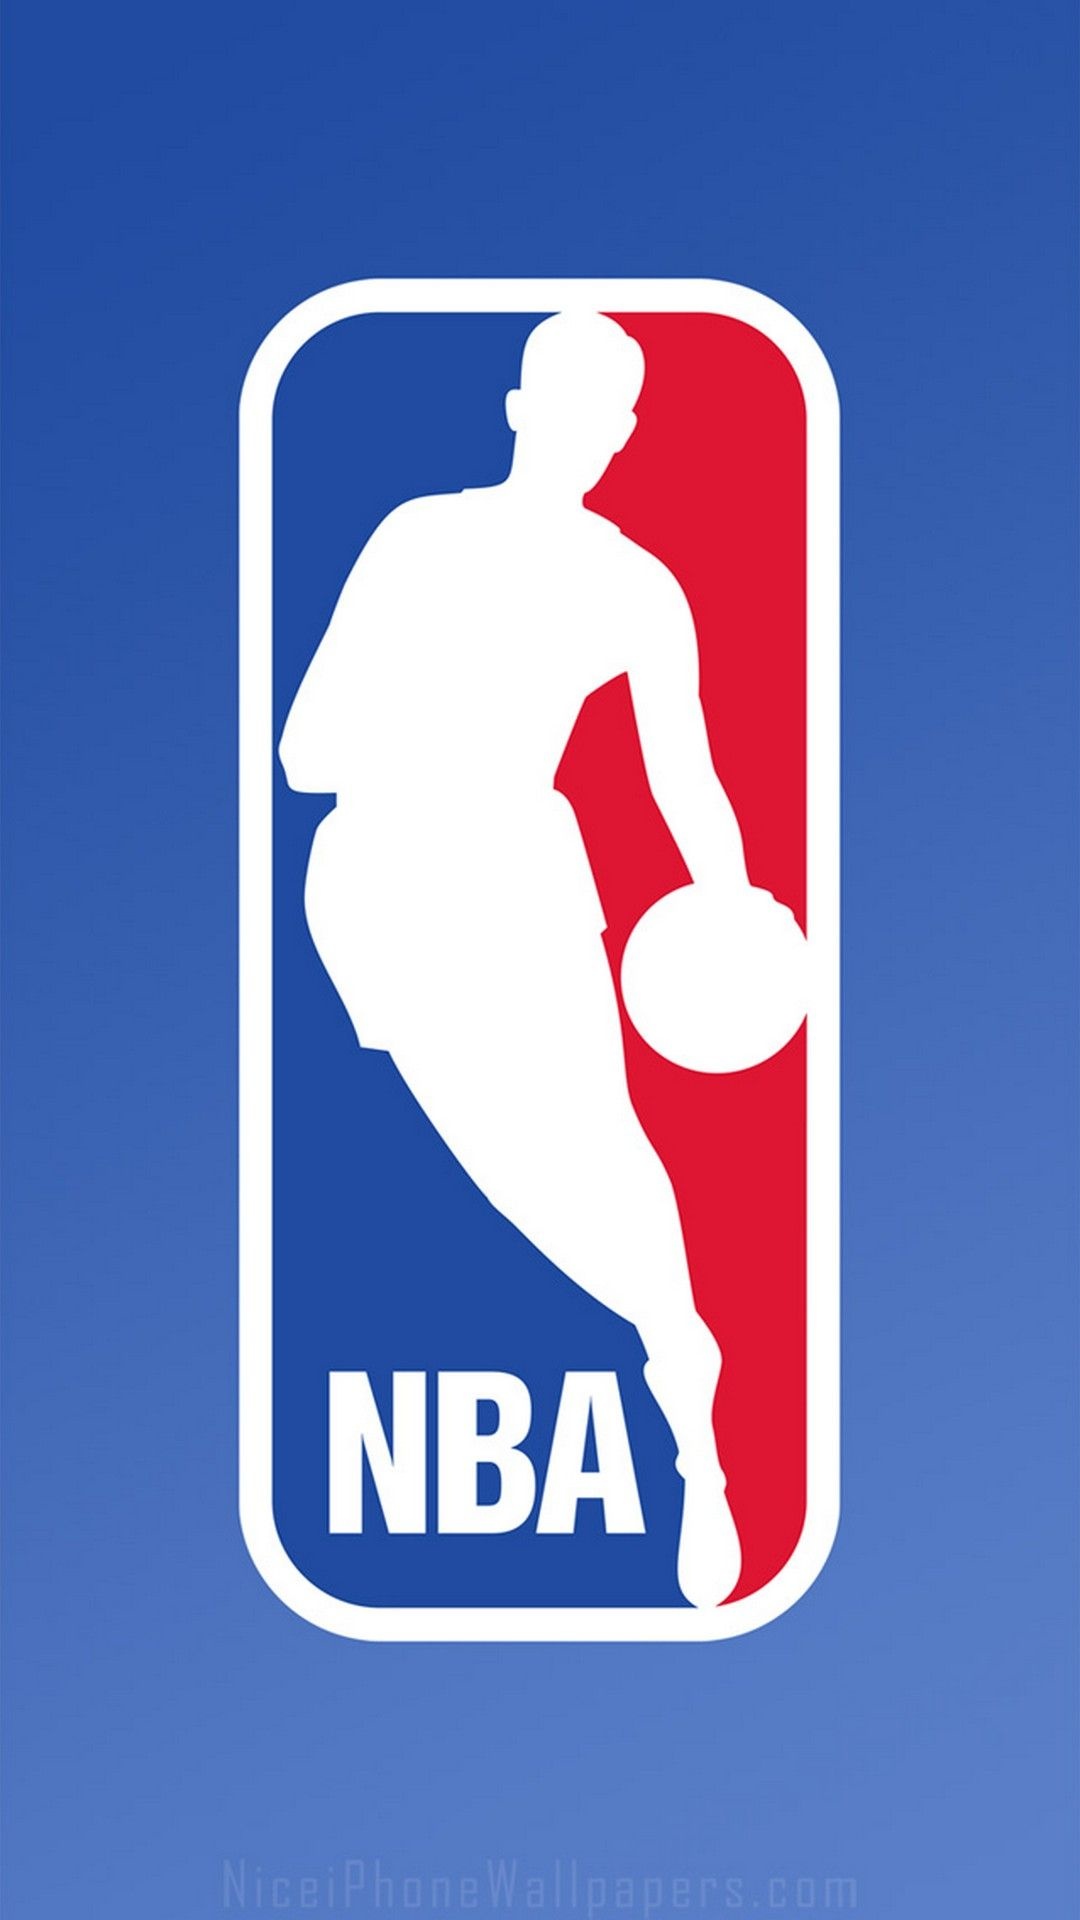 NBA logo phone wallpapers, Customizable backgrounds, Mobile style, Basketball pride, 1080x1920 Full HD Phone